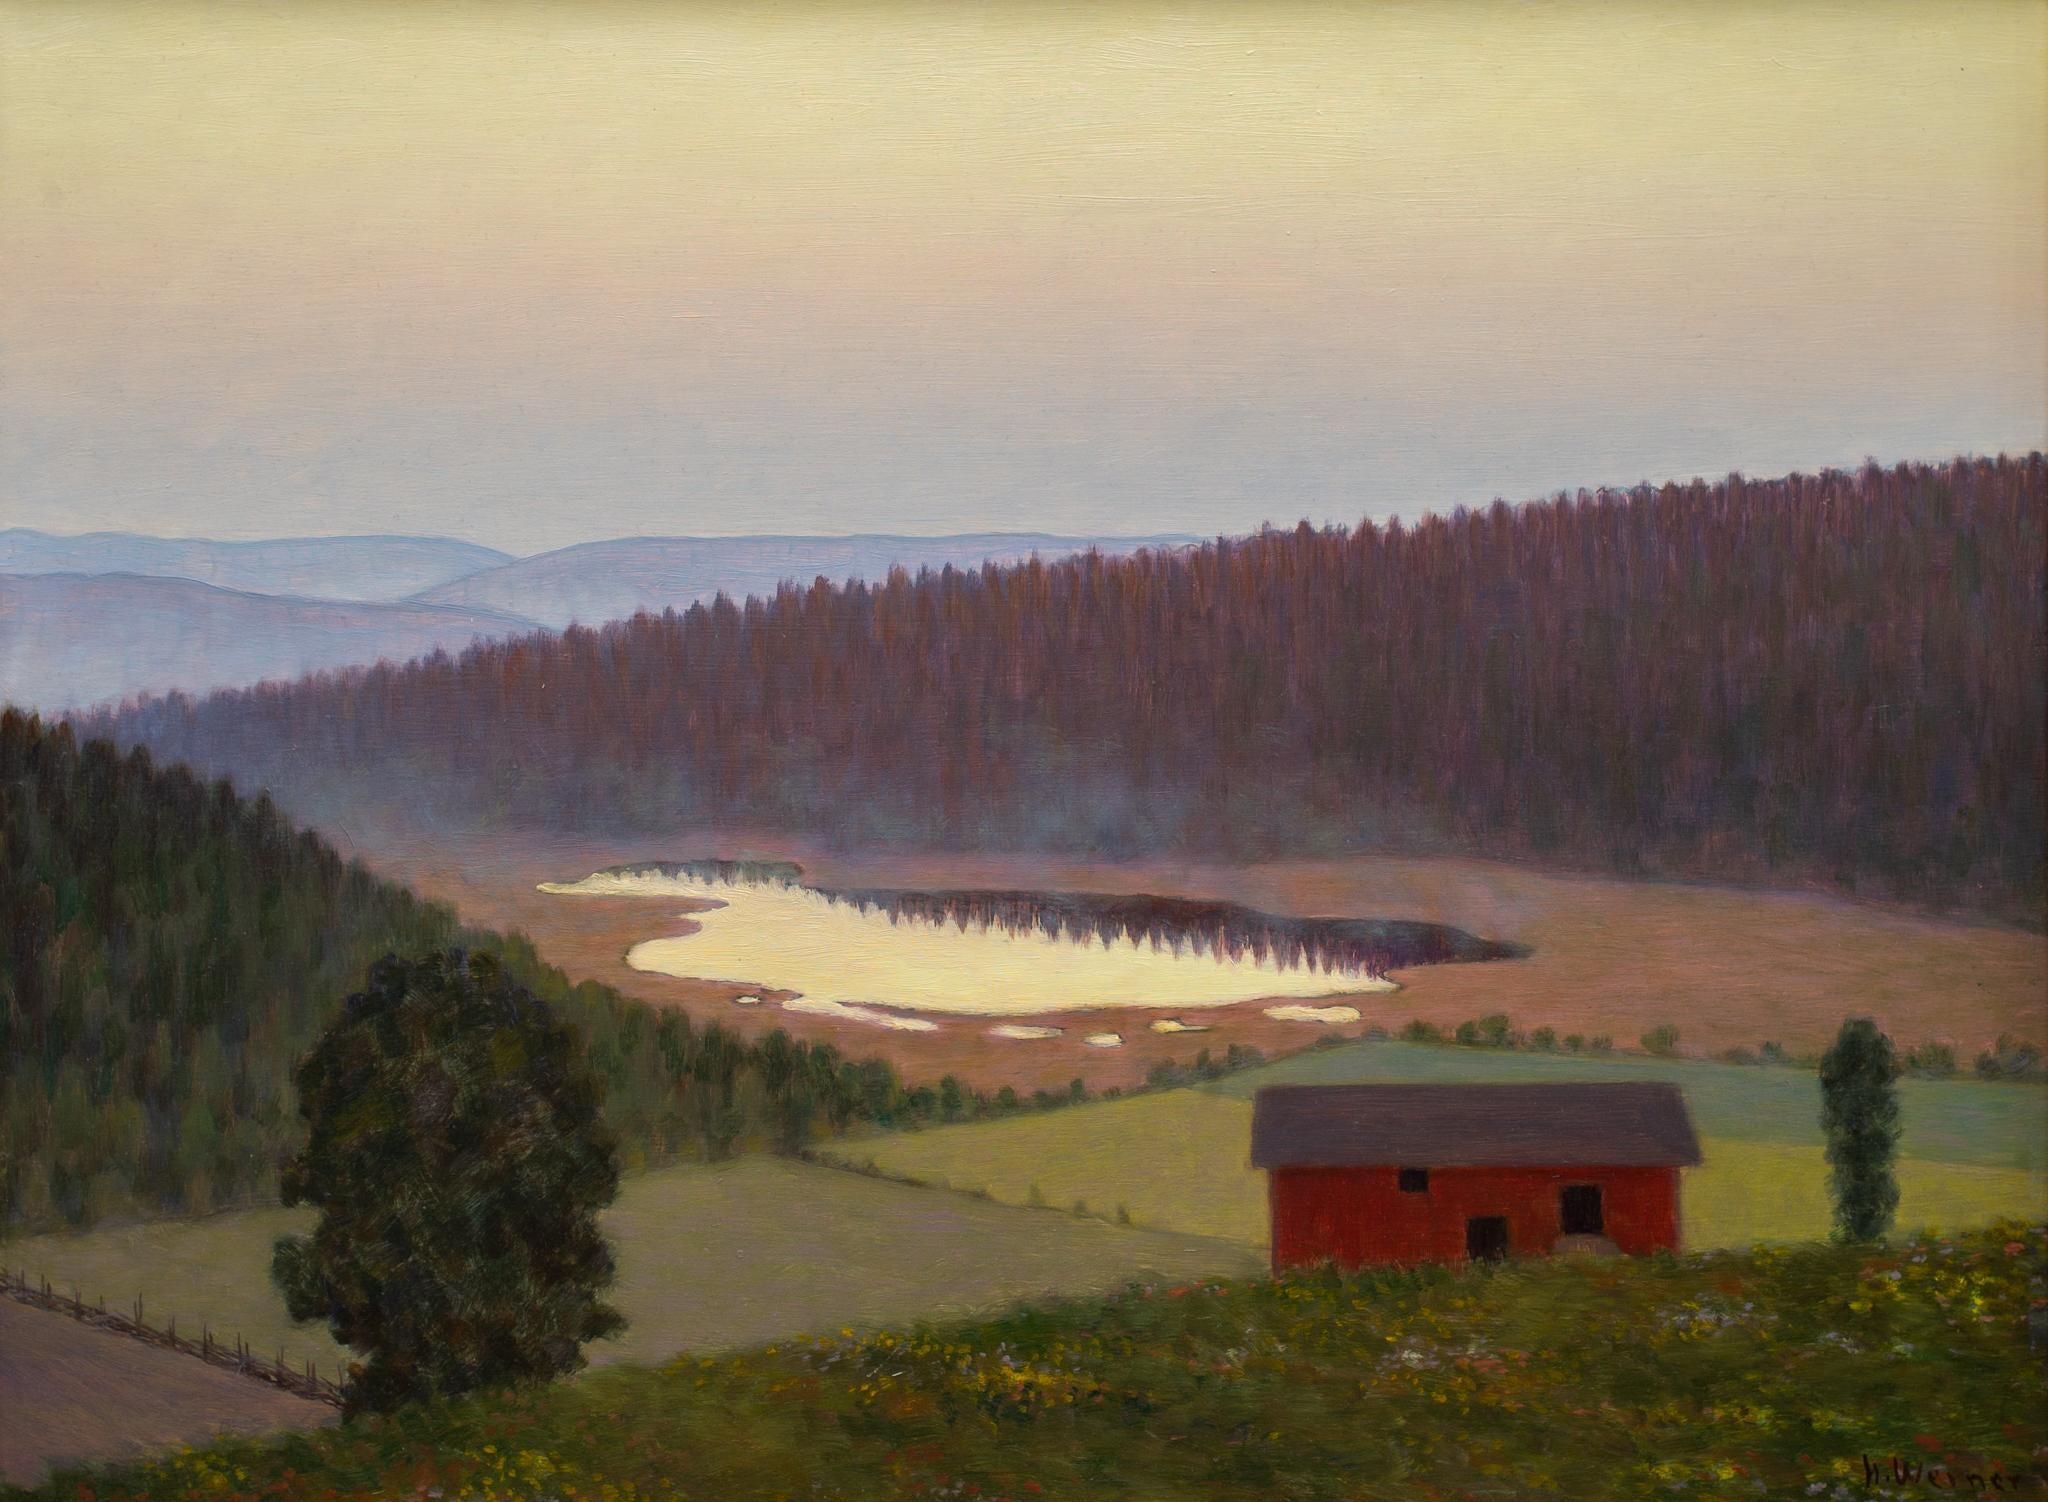 Hilding Werner, A Värmland artist, was a distinguished Swedish painter and draftsman. Born to landowner Anders Andersson and Inga Maria Johannesdotter, Werner's artistic journey began after completing his studies at Karlstad University. In 1899, he